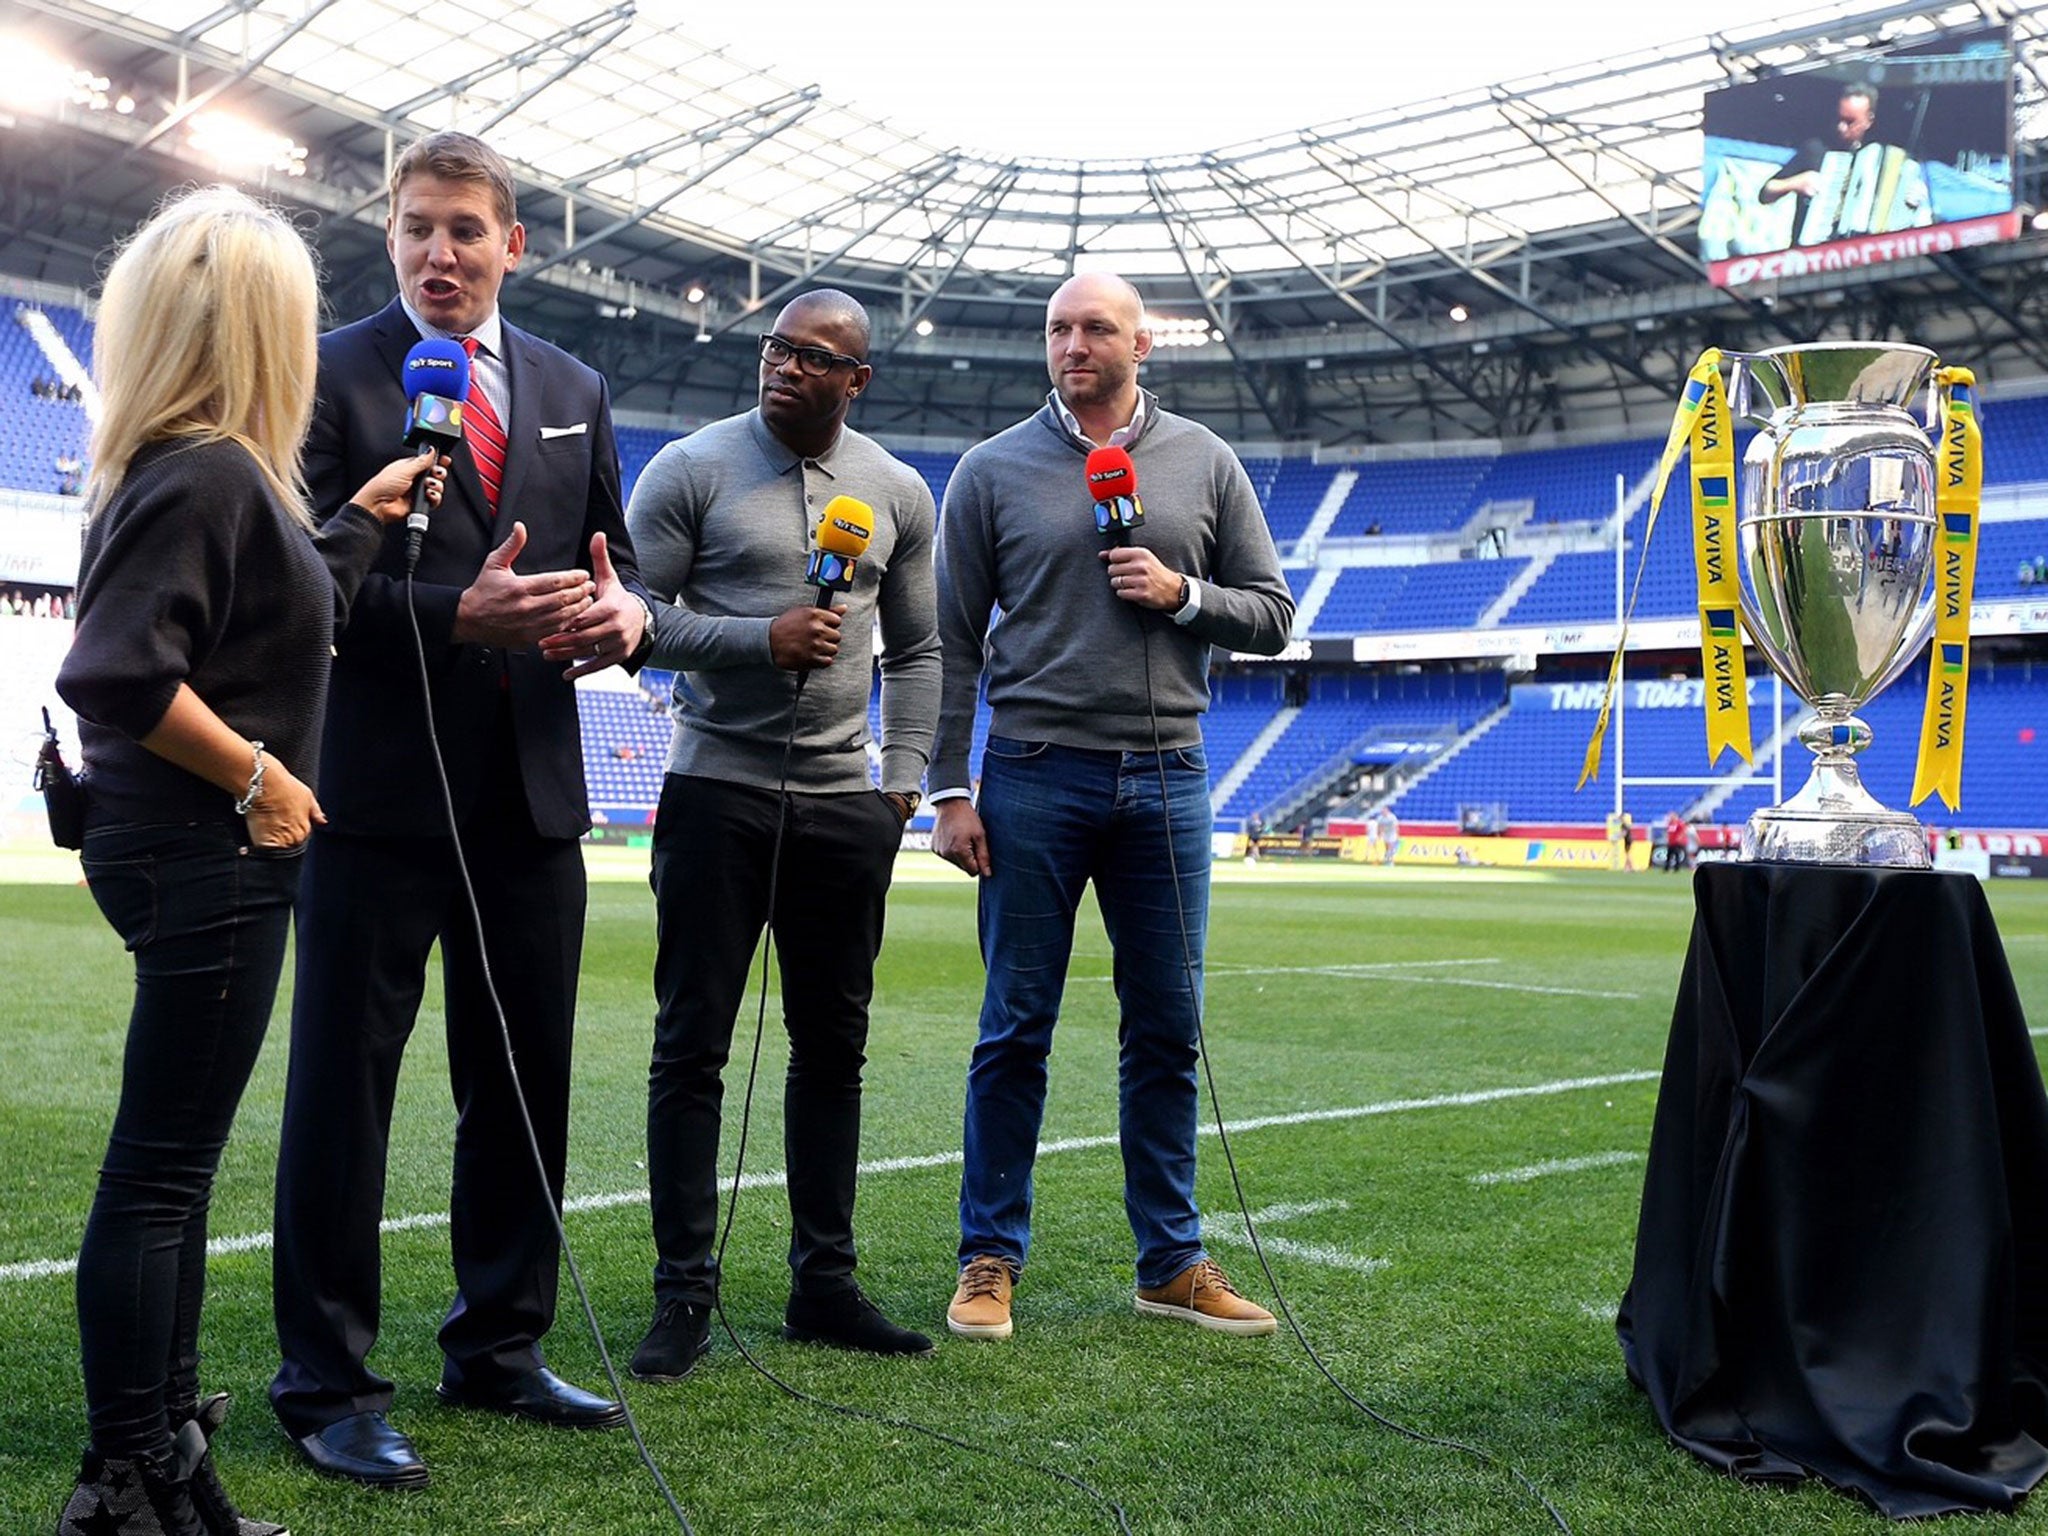 The BT Sport team at the Red Bull Arena